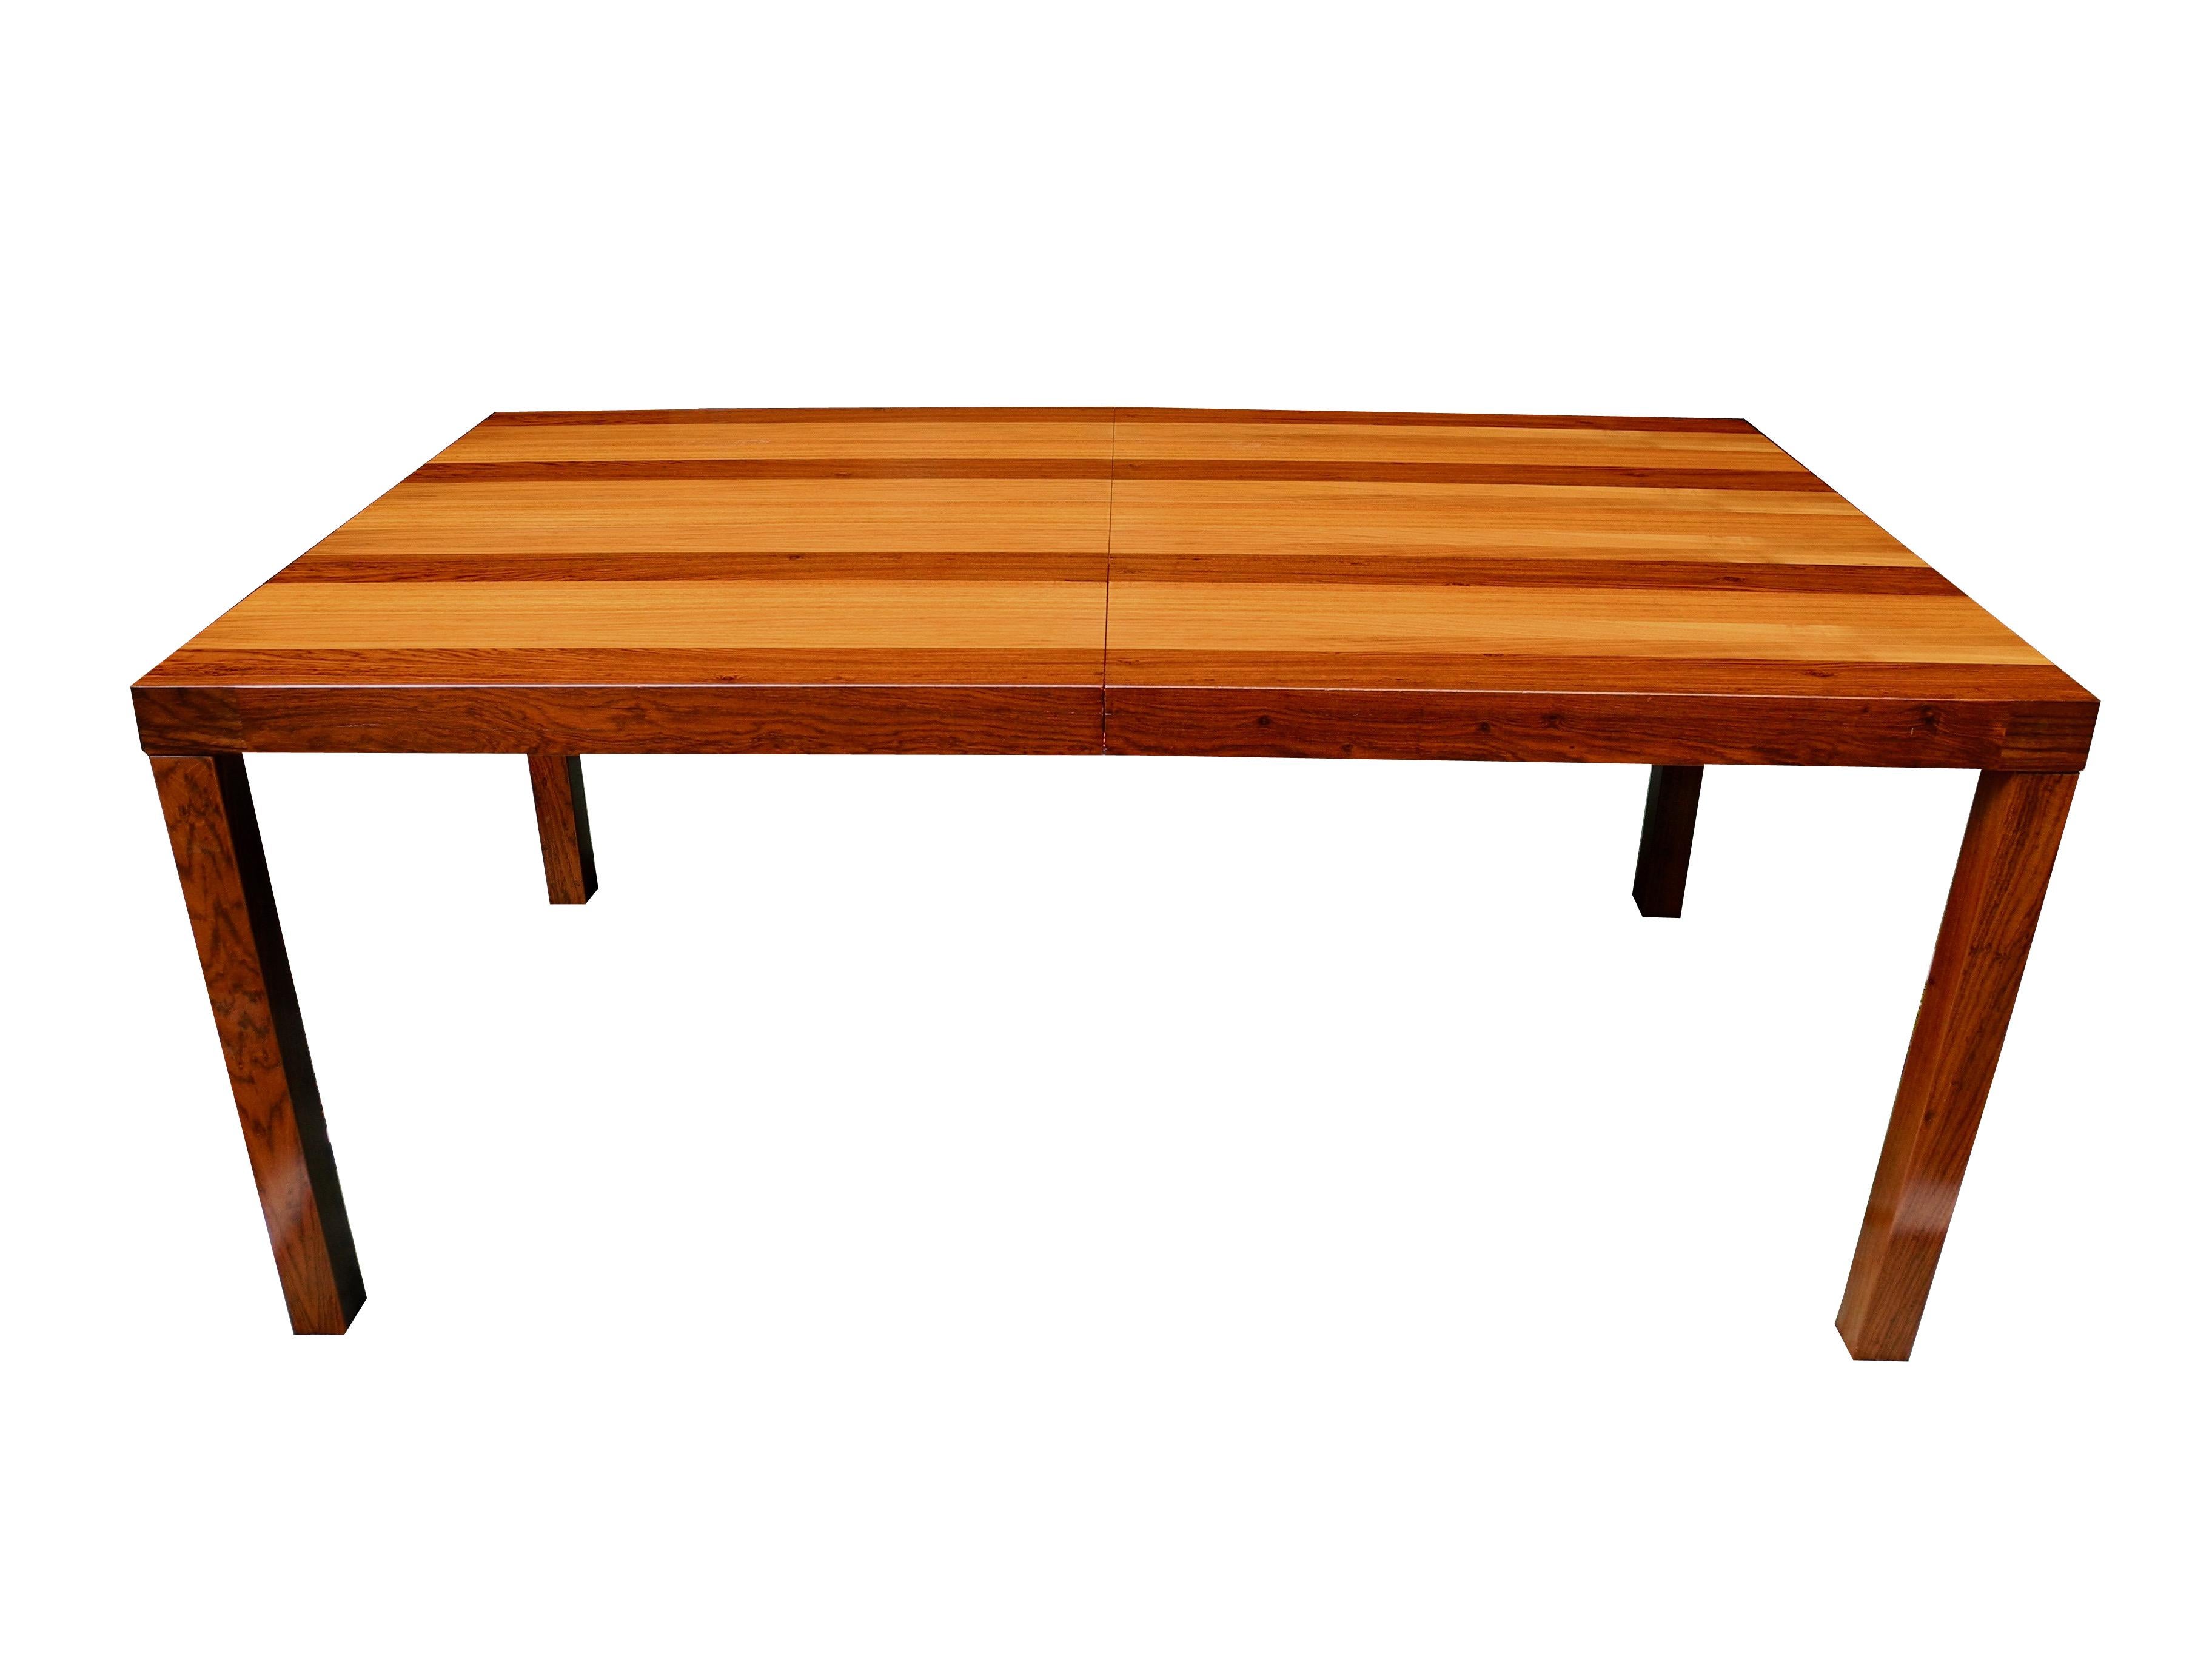 American Mid-Century Modern Parson Striped Table by Milo Baughman in Three Woods For Sale